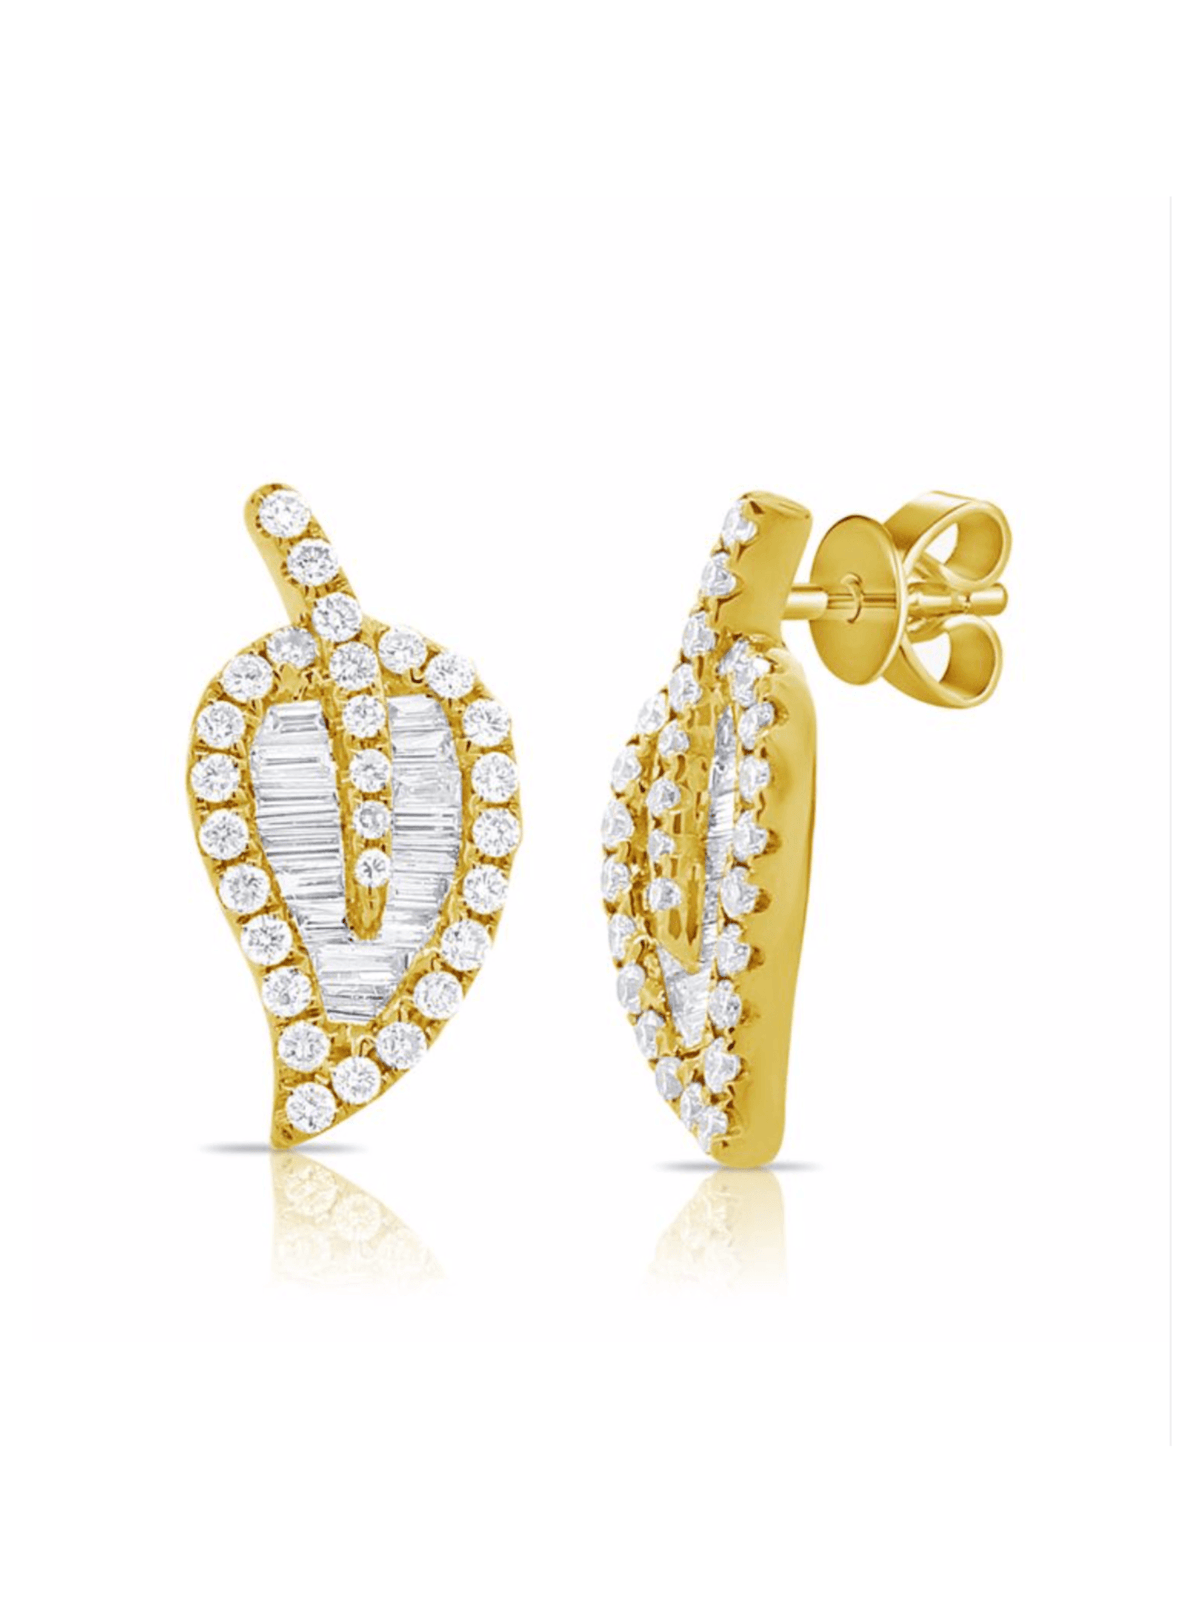 yellow gold round and baguette diamonds earrings in shape of a leaf on white background